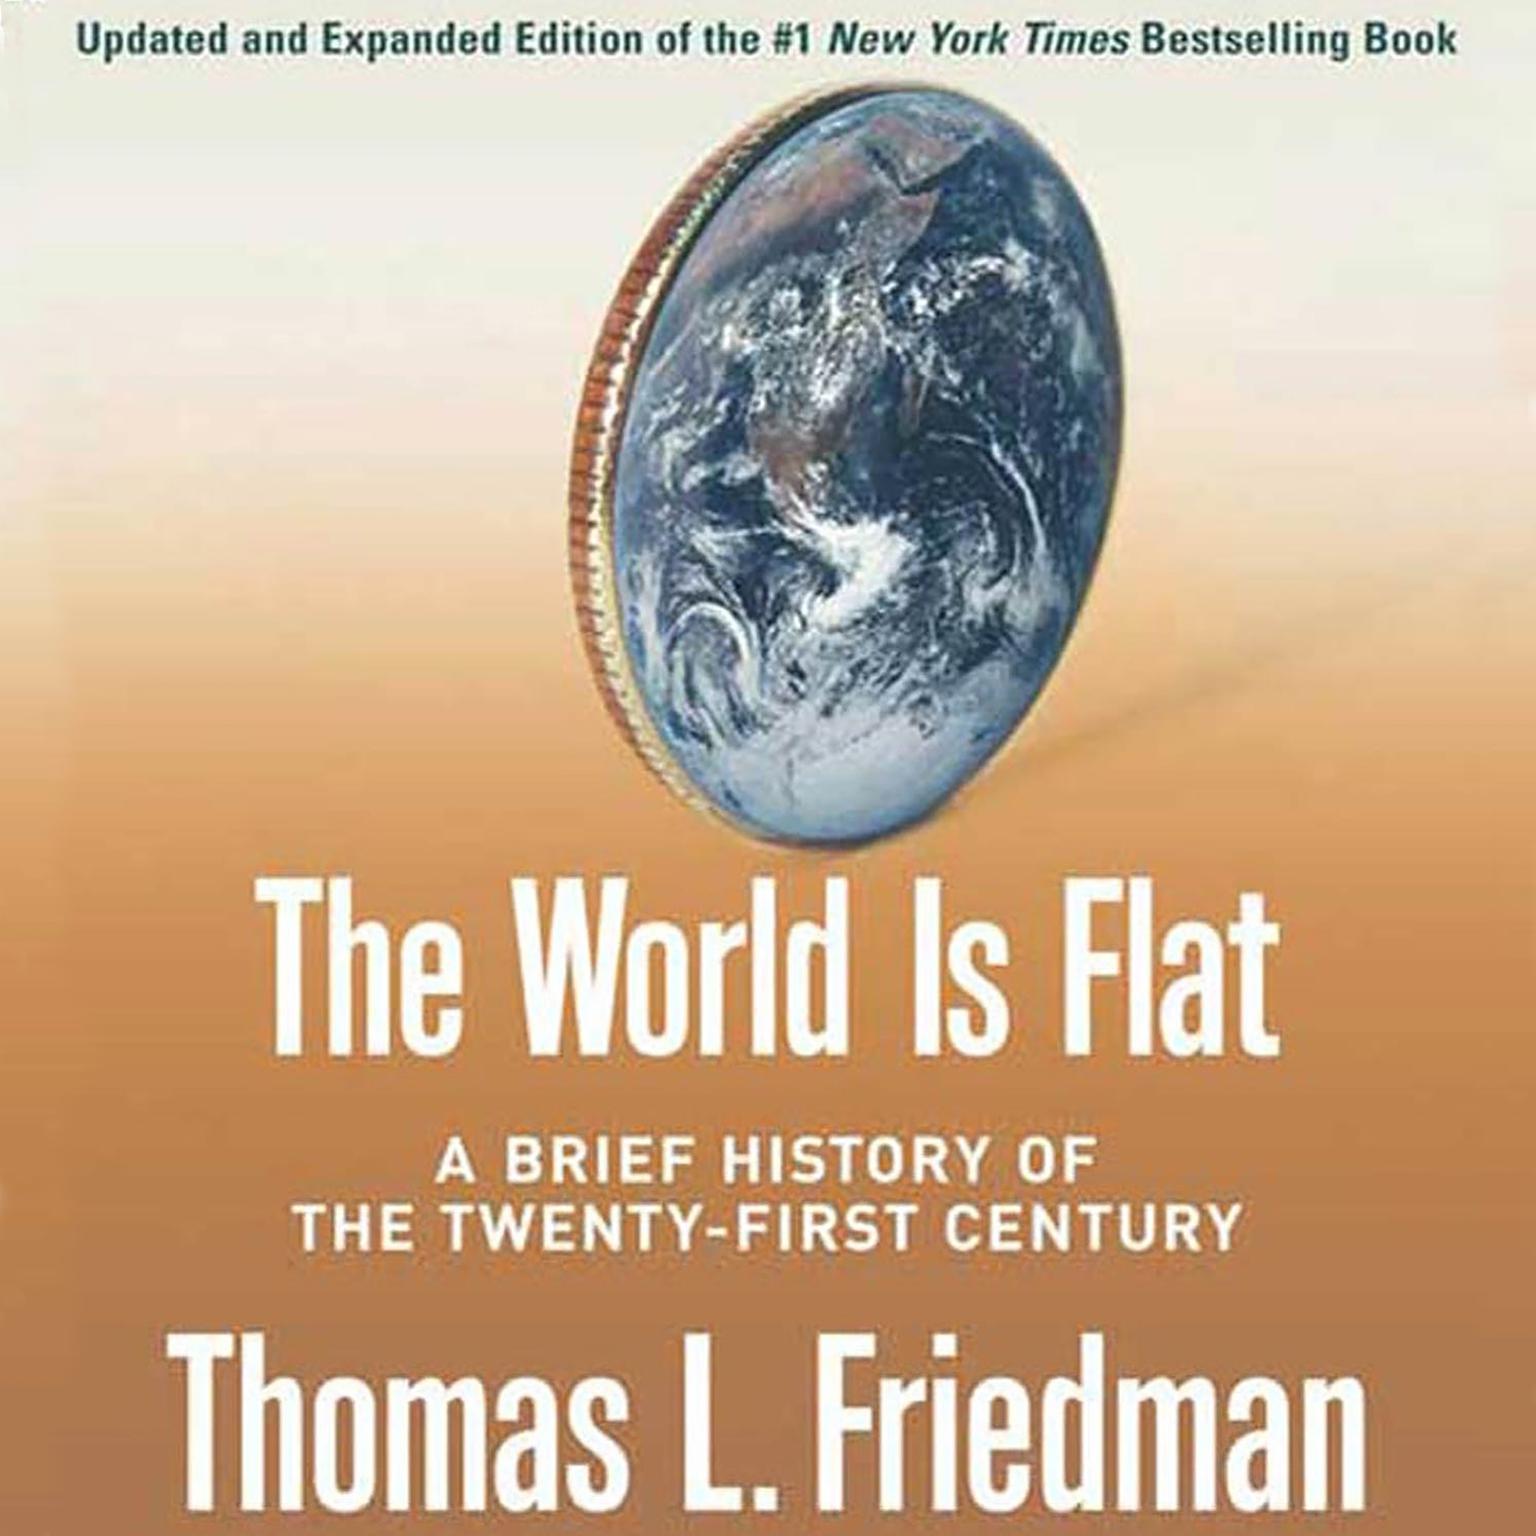 The World Is Flat [Updated and Expanded] (Abridged): A Brief History of the Twenty-first Century Audiobook, by Thomas L. Friedman